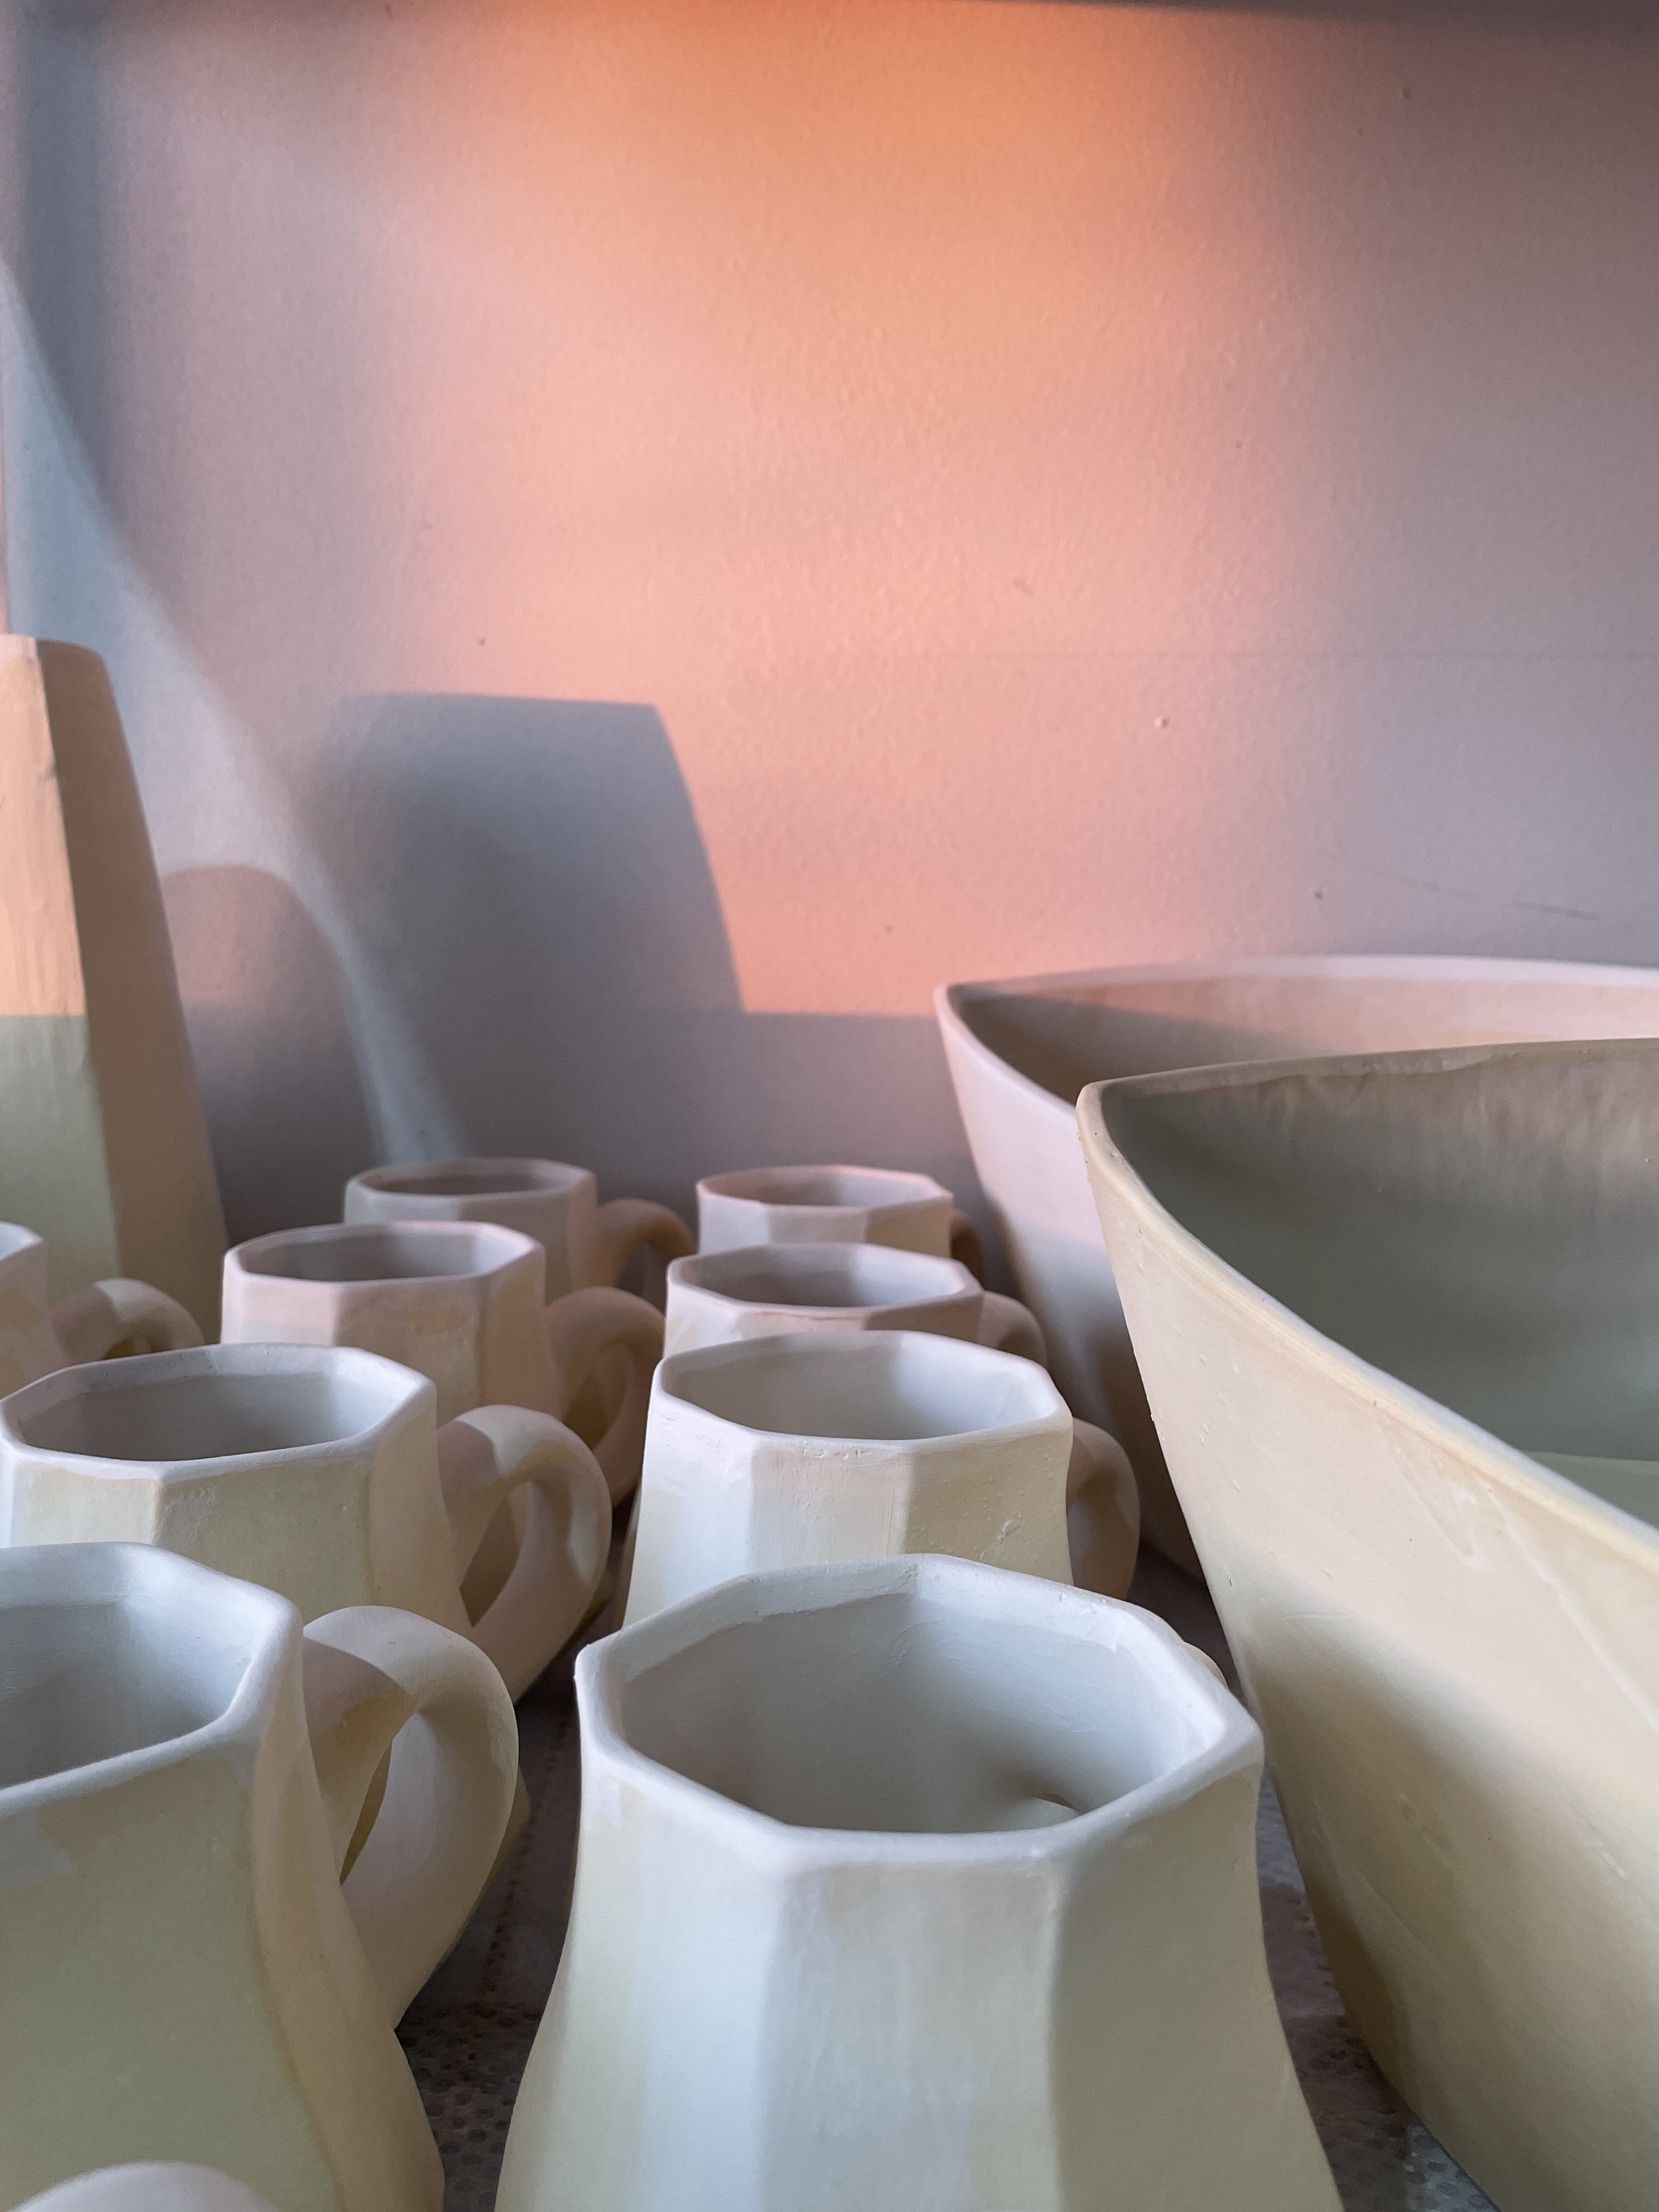  A picture of eight ceramic coffee mugs and two large bowls made by Lauren HB Studio 